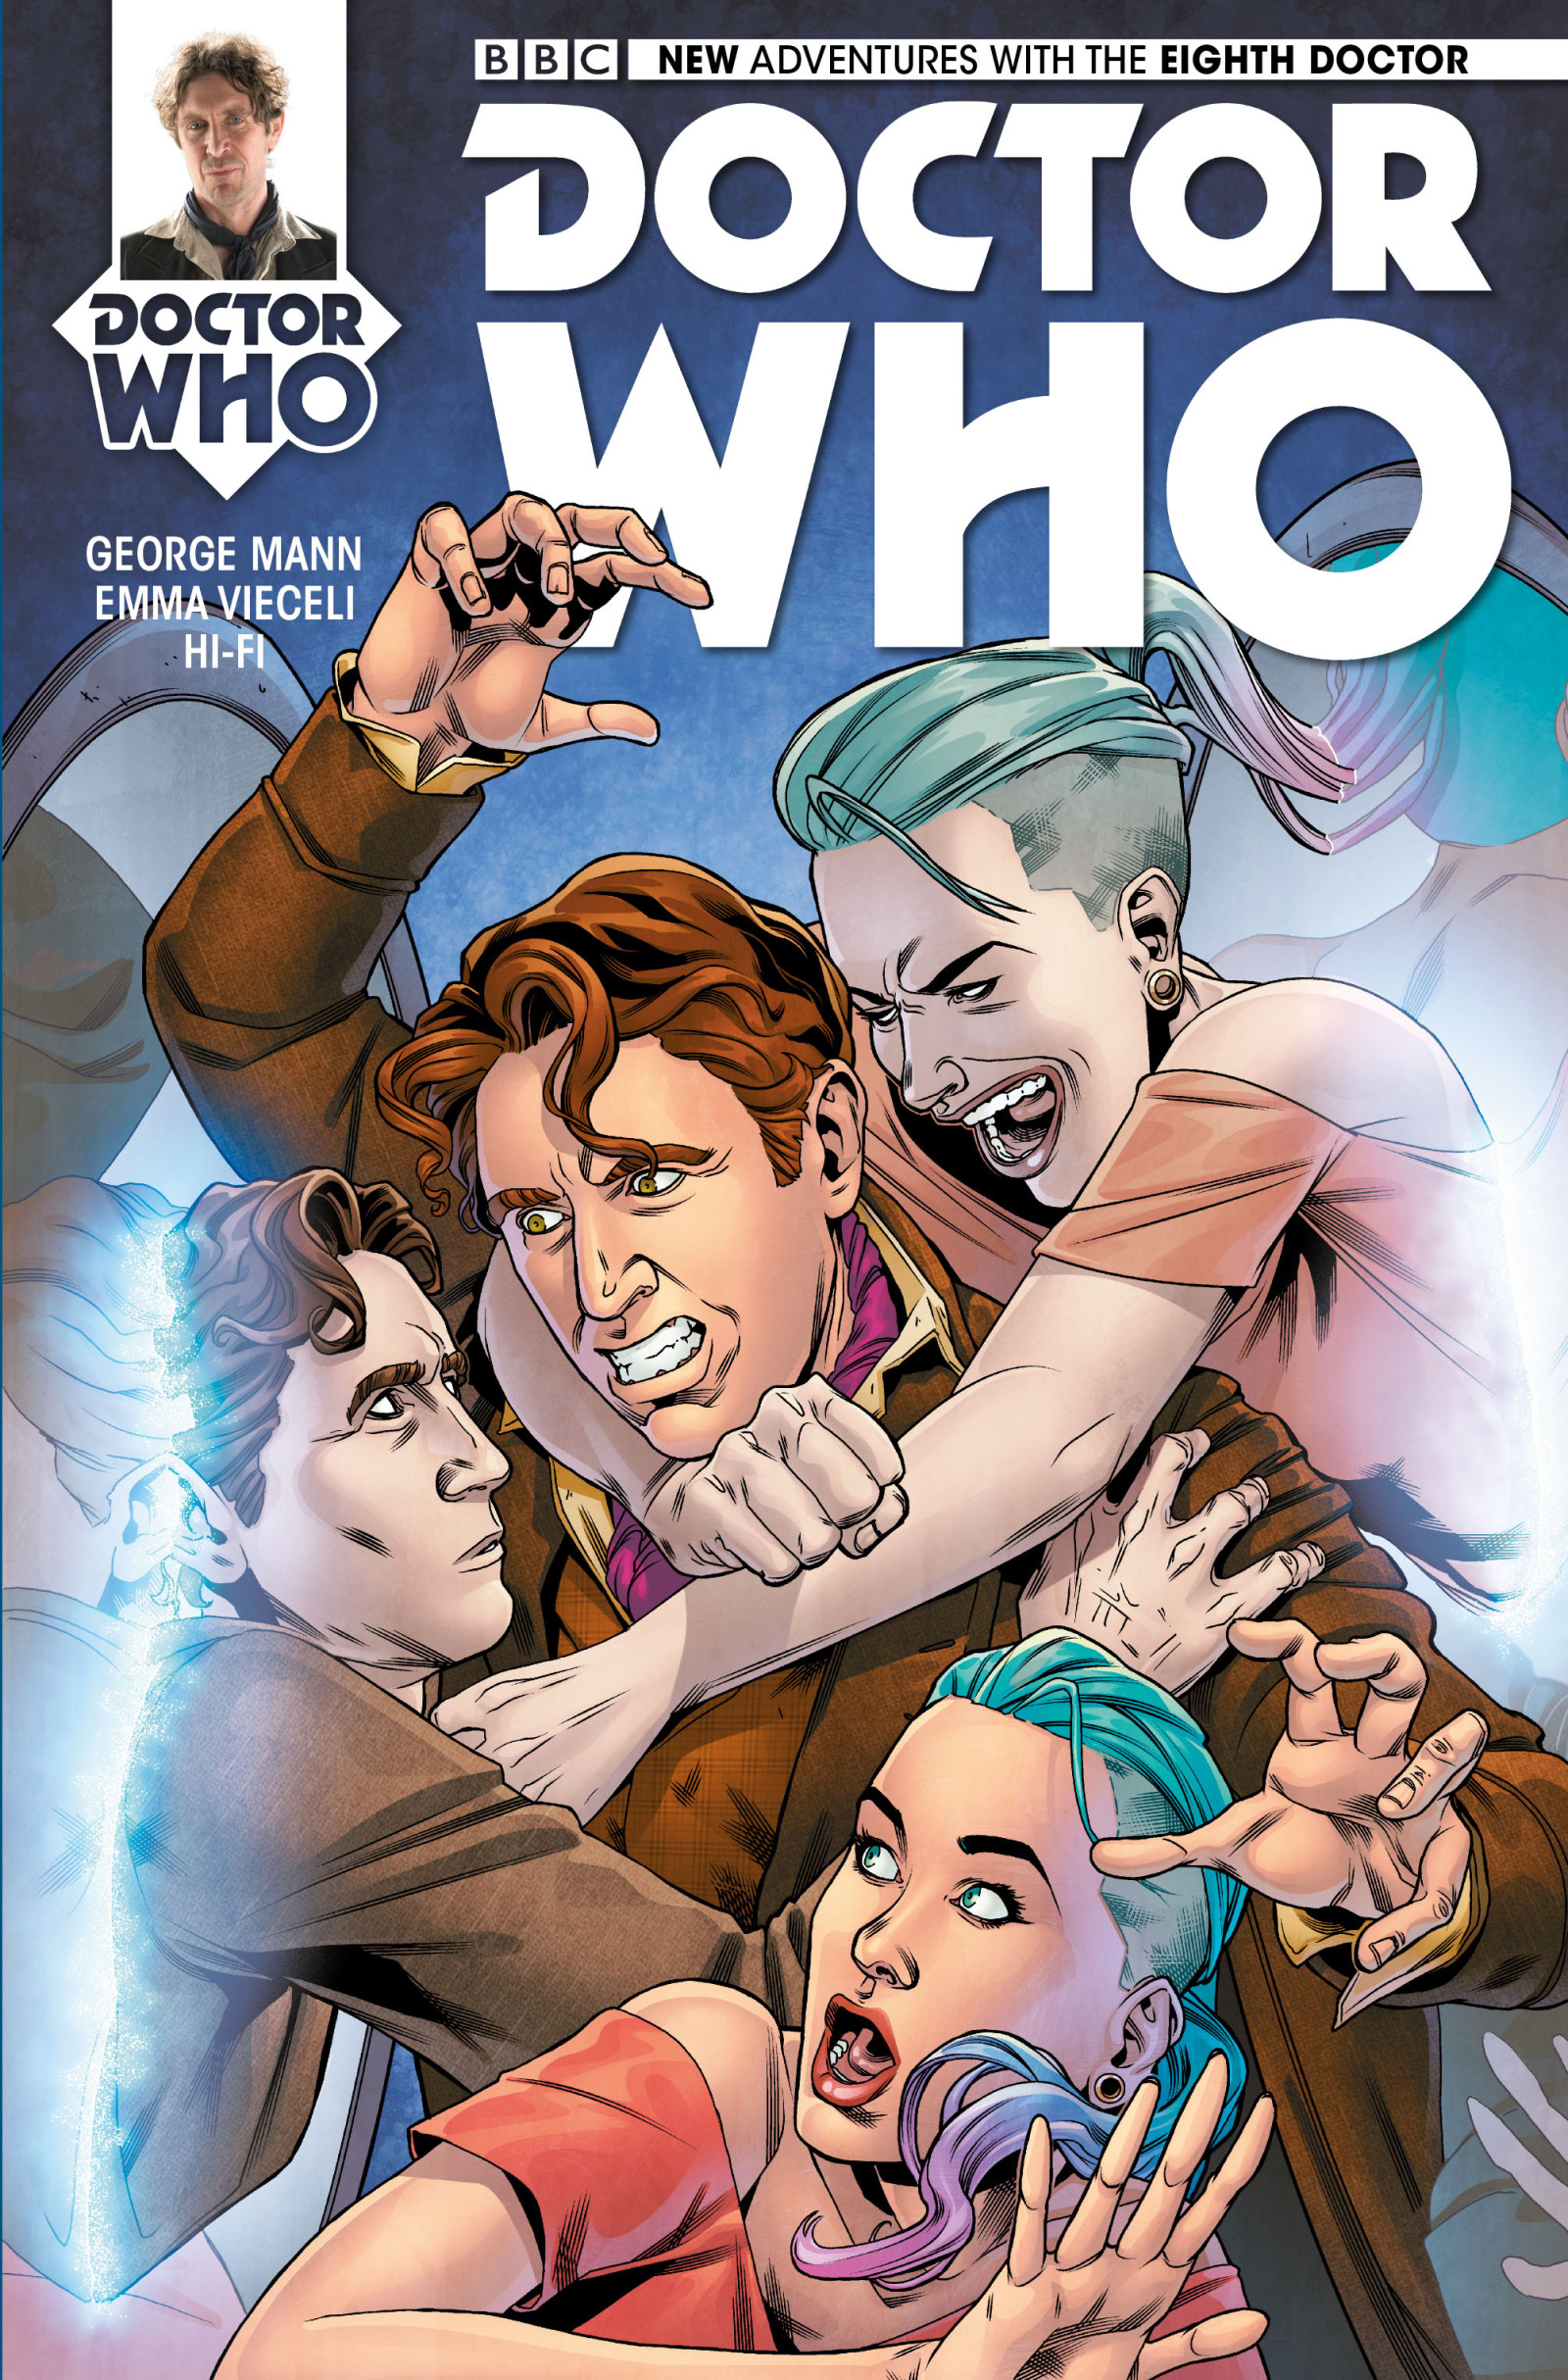 Doctor Who: The Eighth Doctor #3 - Cover A